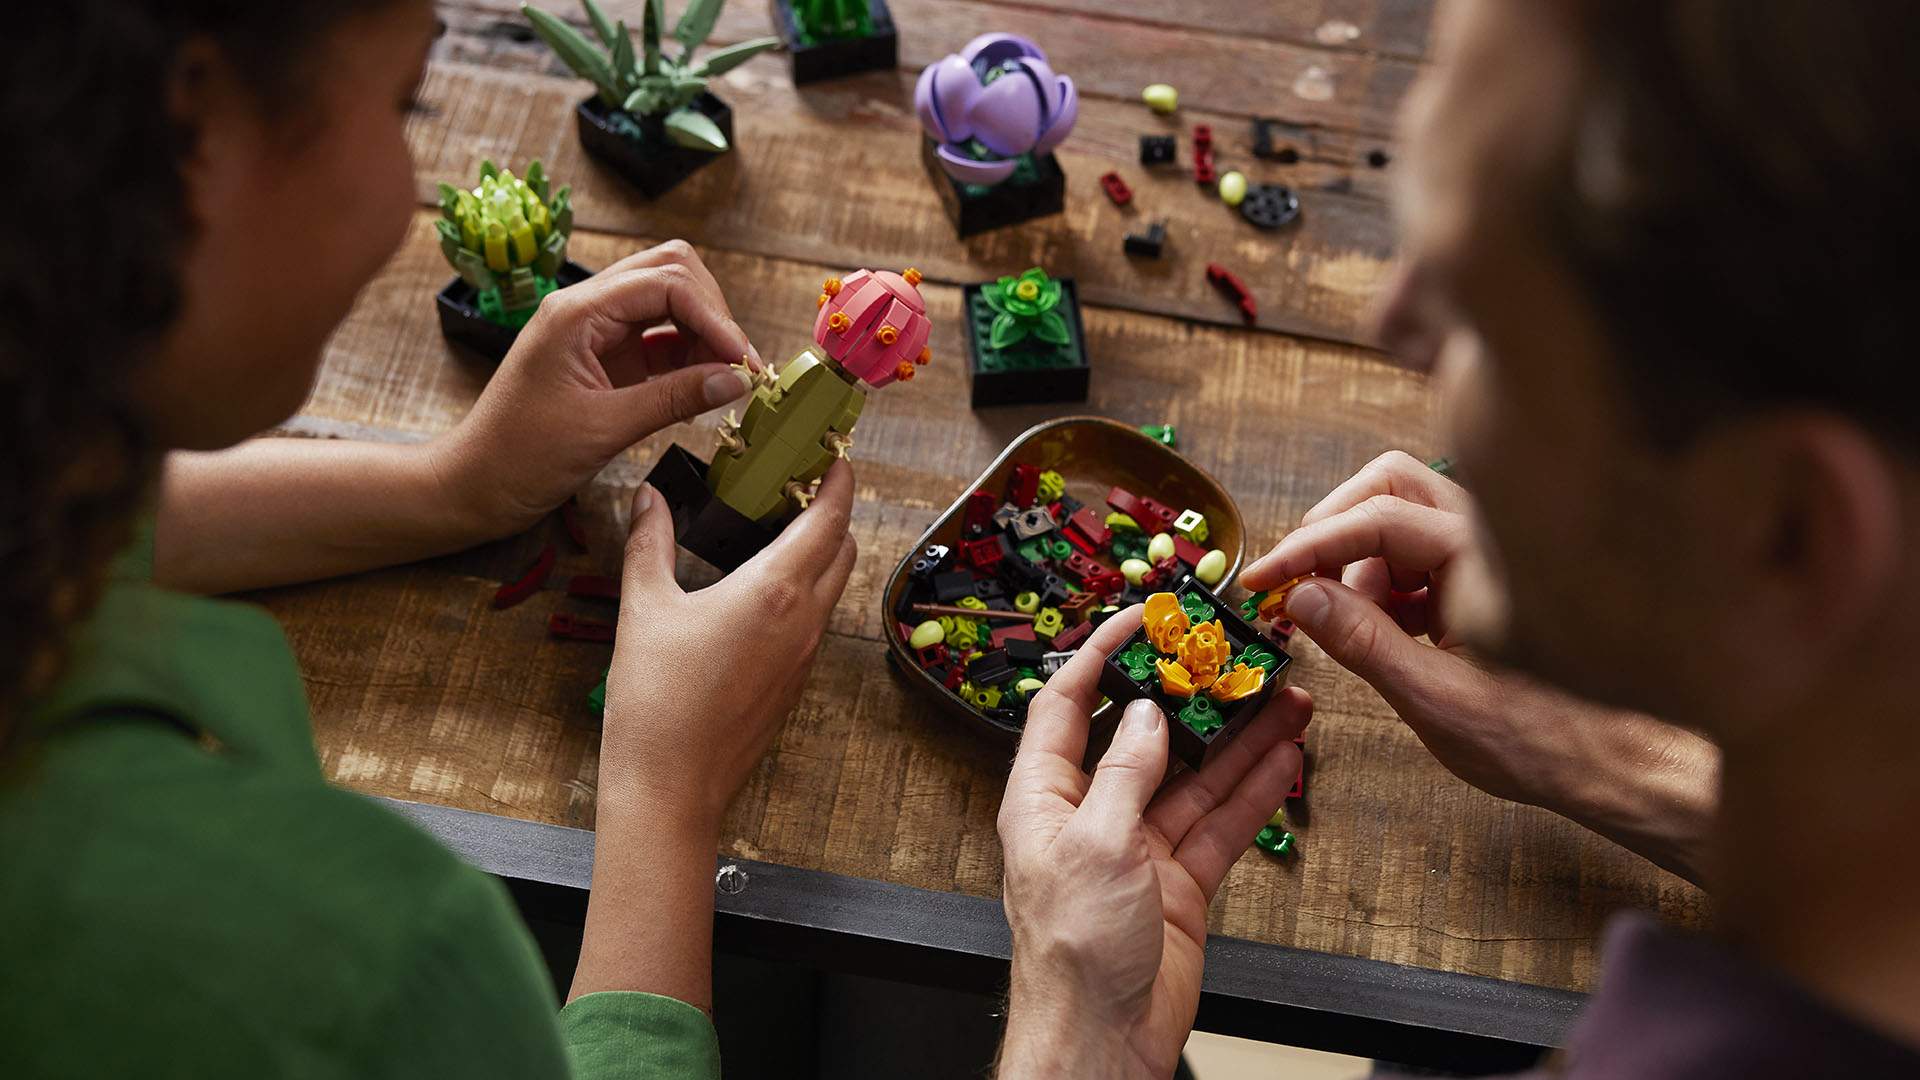 Lego's Latest Adorable Floral Kits Let You Build Succulents and Orchids That No One Can Kill